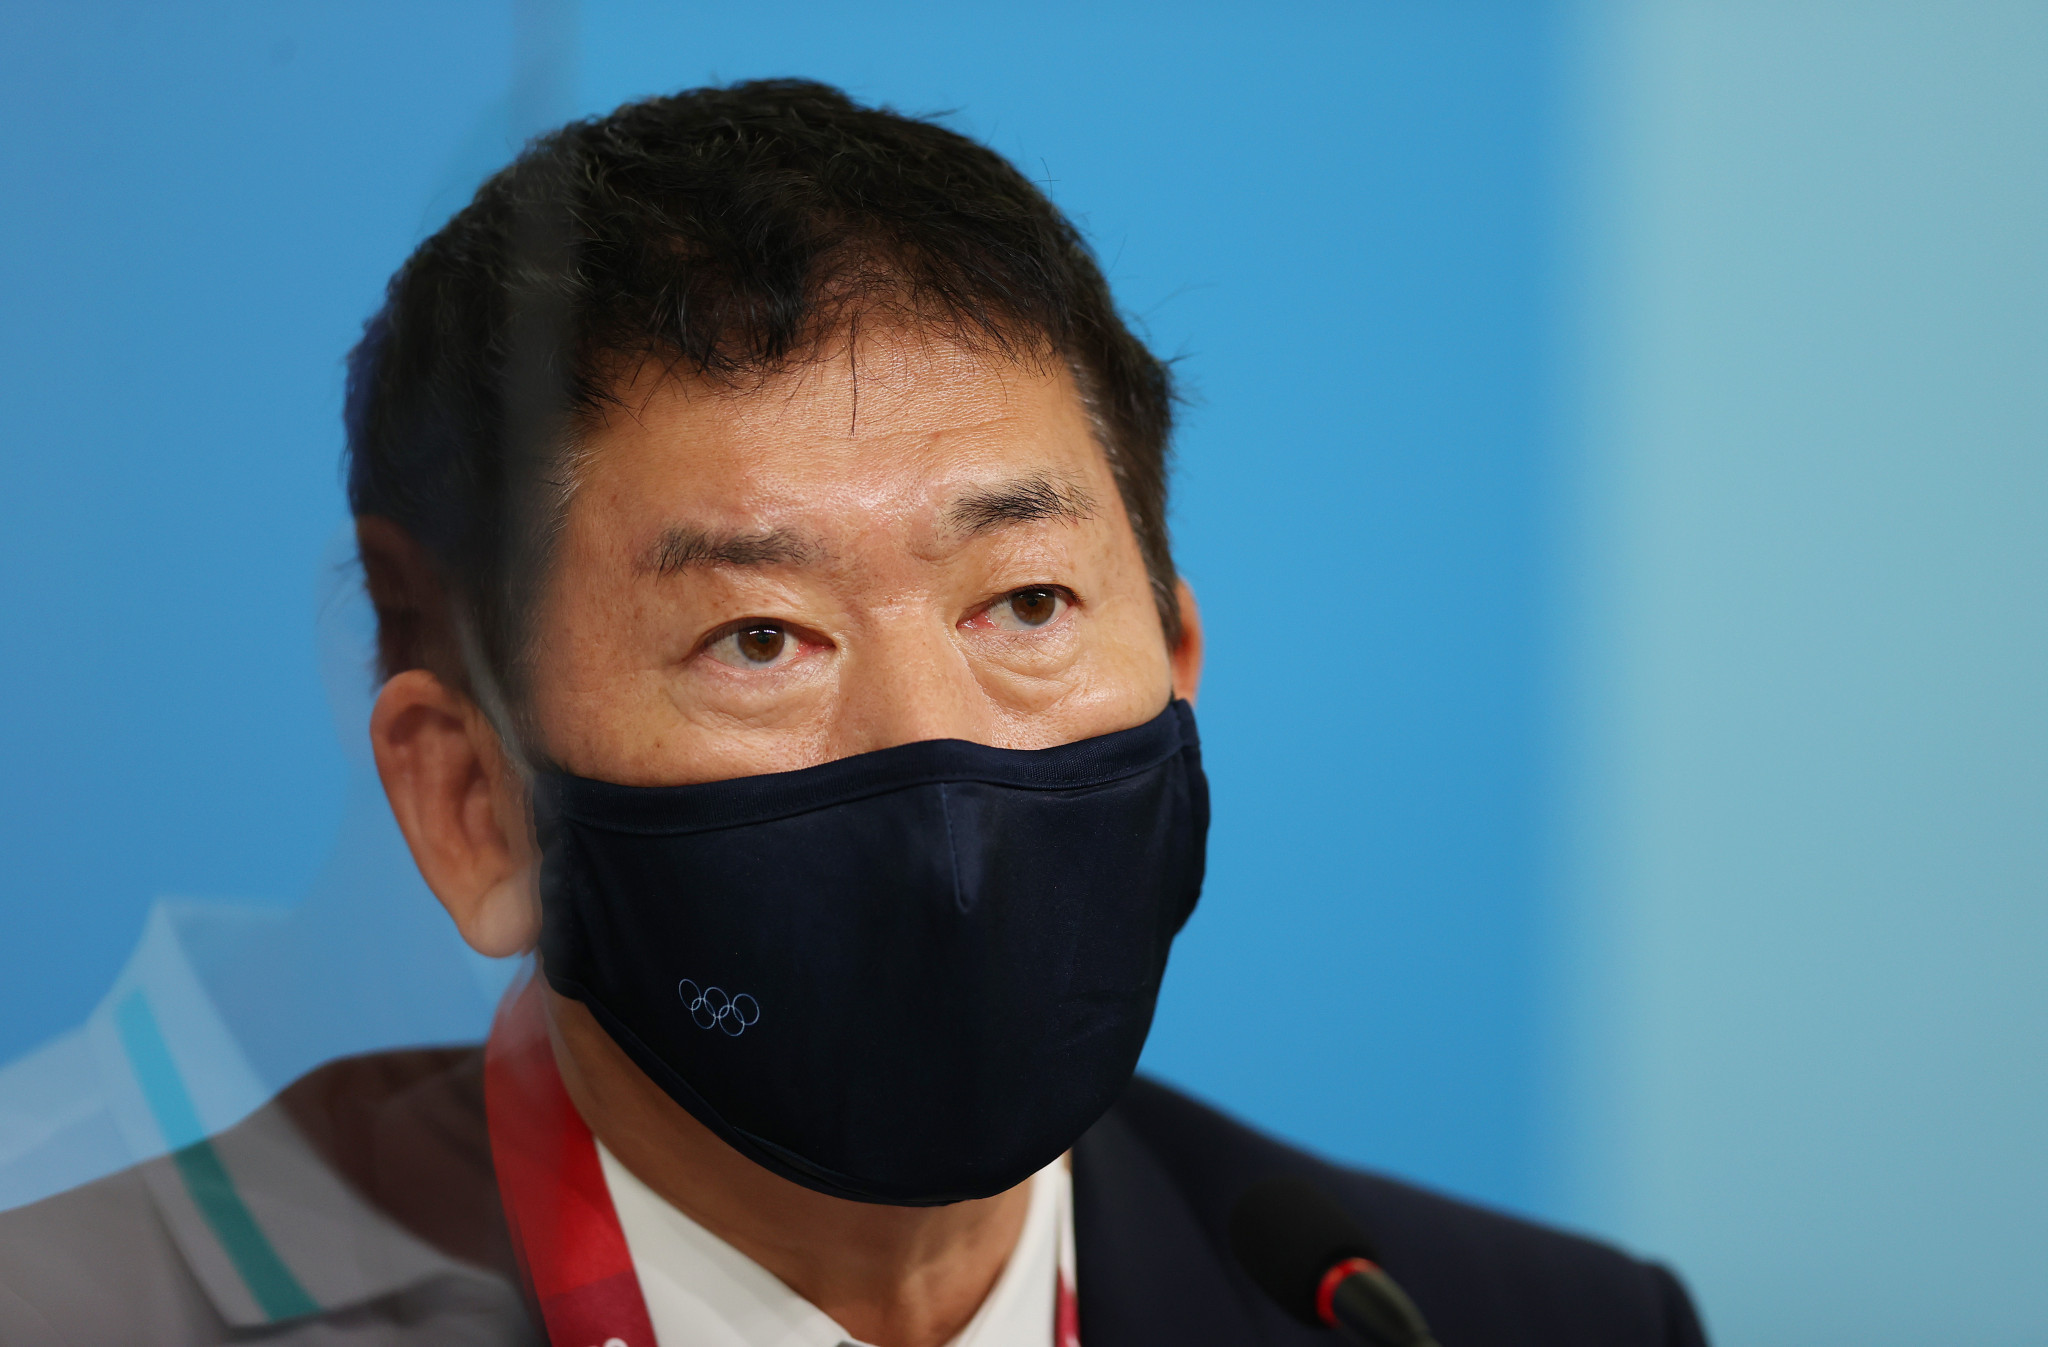 IOC member Morinari Watanabe was re-elected as FIG President at the Congress held in the Turkish city of Antalya last year ©Getty Images